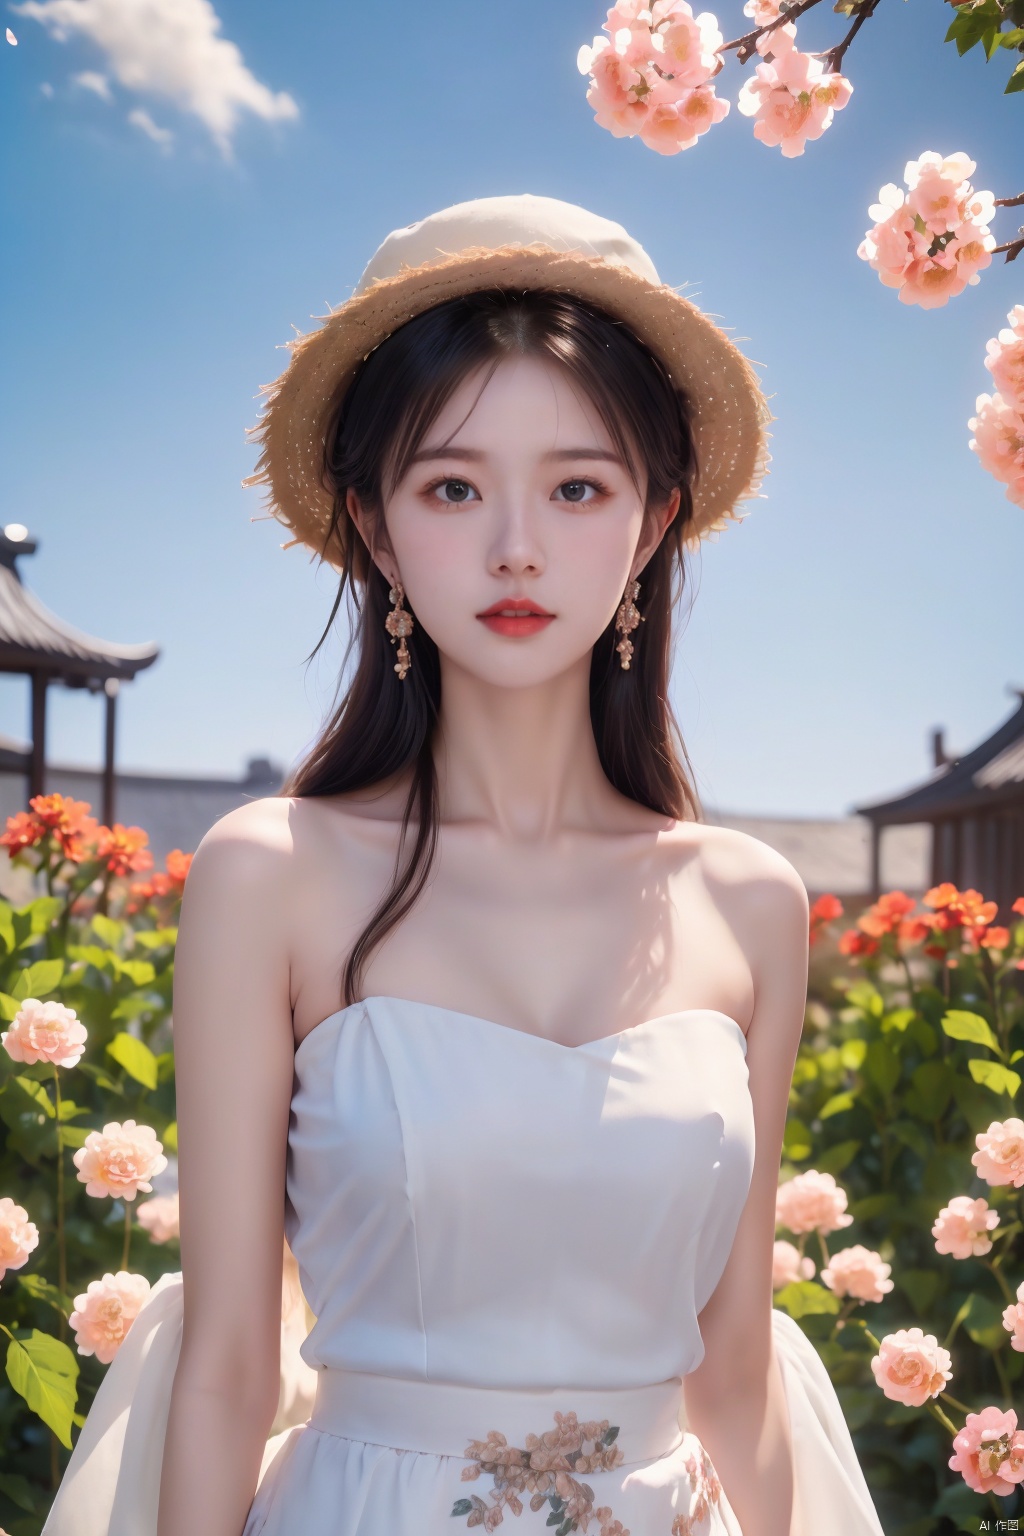  masterpiece, 1 girl, 18 years old, Look at me, long_hair, straw_hat, Wreath, petals, Big breasts, Light blue sky, Clouds, hat_flower, jewelry, Stand, outdoors, Garden, falling_petals, White dress, ajkds, textured skin, super detail, best quality, (\meng ze\)